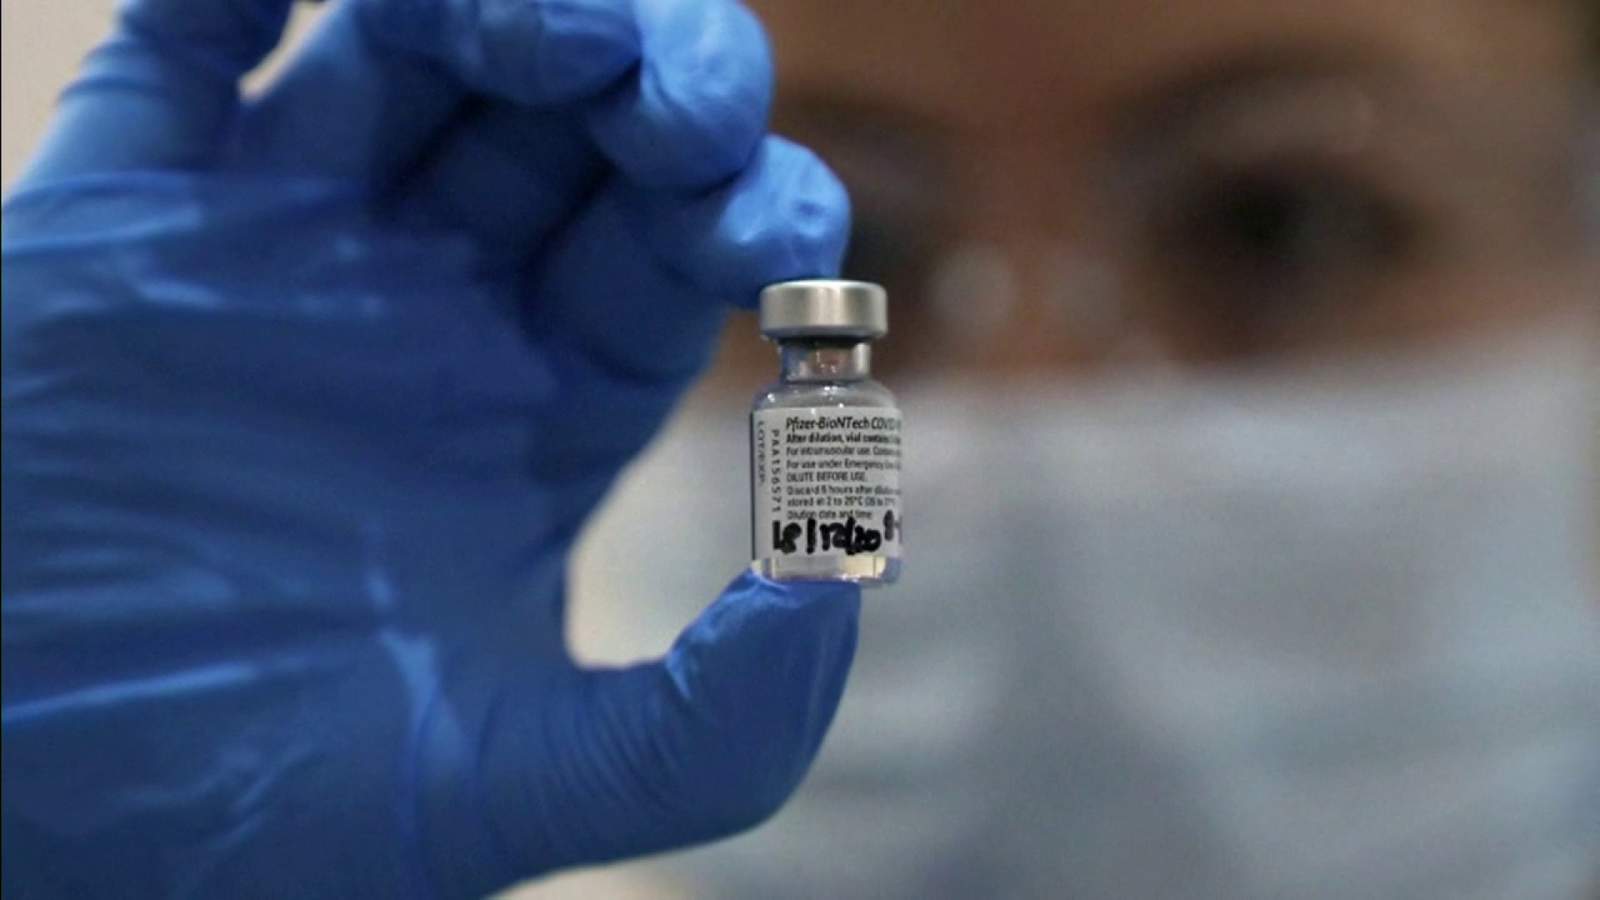 WATCH: Distributing COVID-19 vaccine is a big undertaking, but Florida gov says state is ready